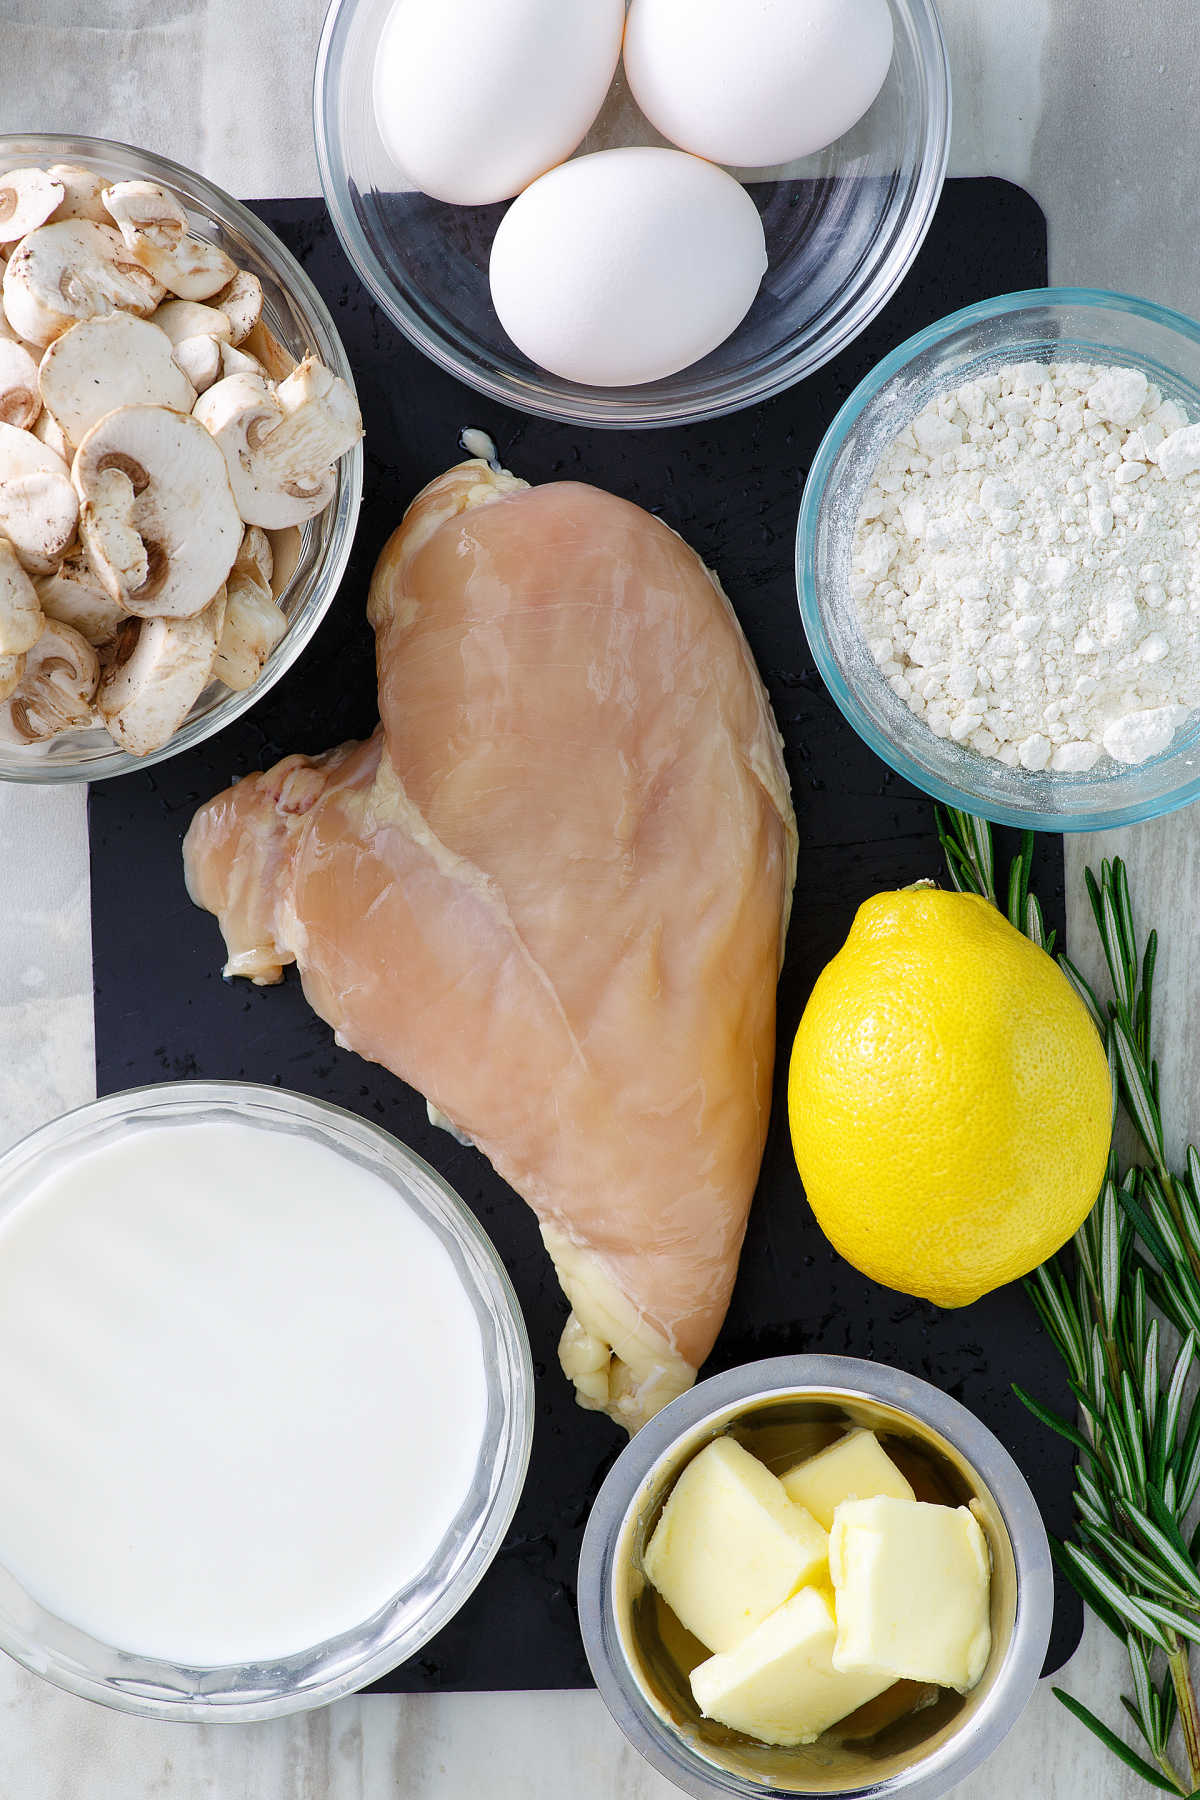 Ingredients including chicken, sliced mushrooms, eggs, flour, lemon, butter, rosemary ready to be made into chicken mushroom crepes.